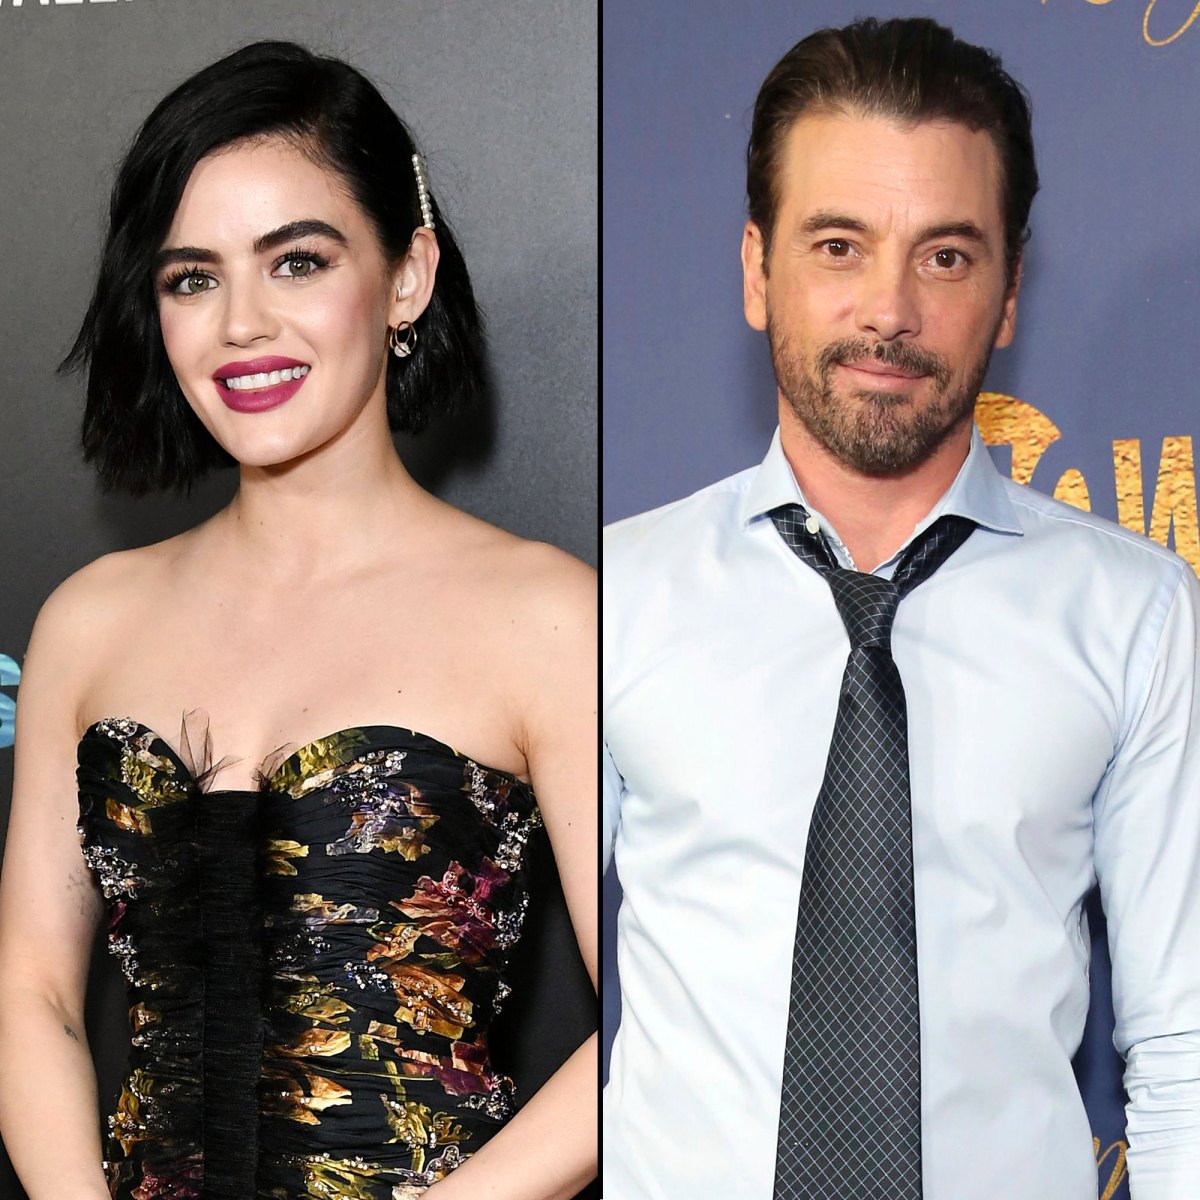 Lucy Hale Spotted Kissing Riverdale's Skeet Ulrich